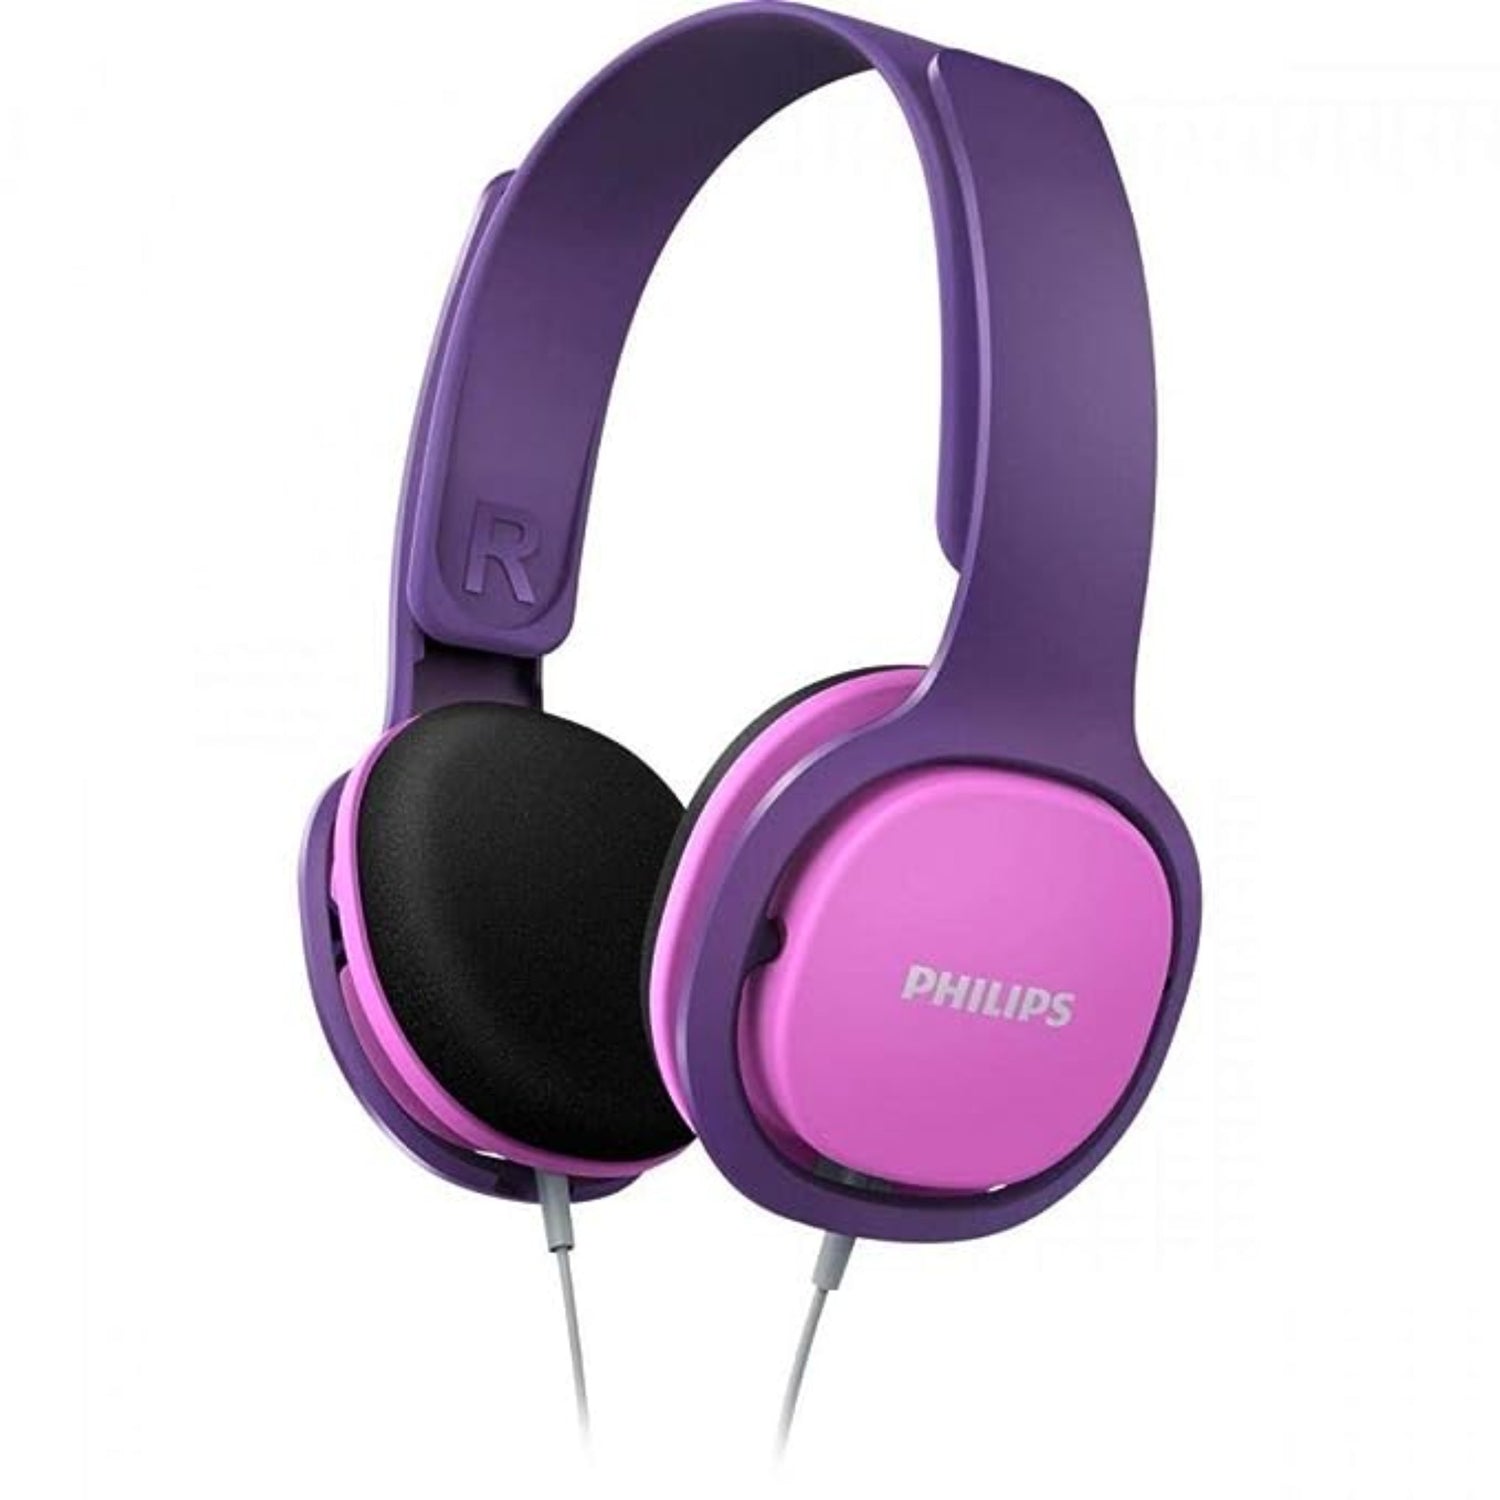 Philips Wired Headphone Shk2000Bl